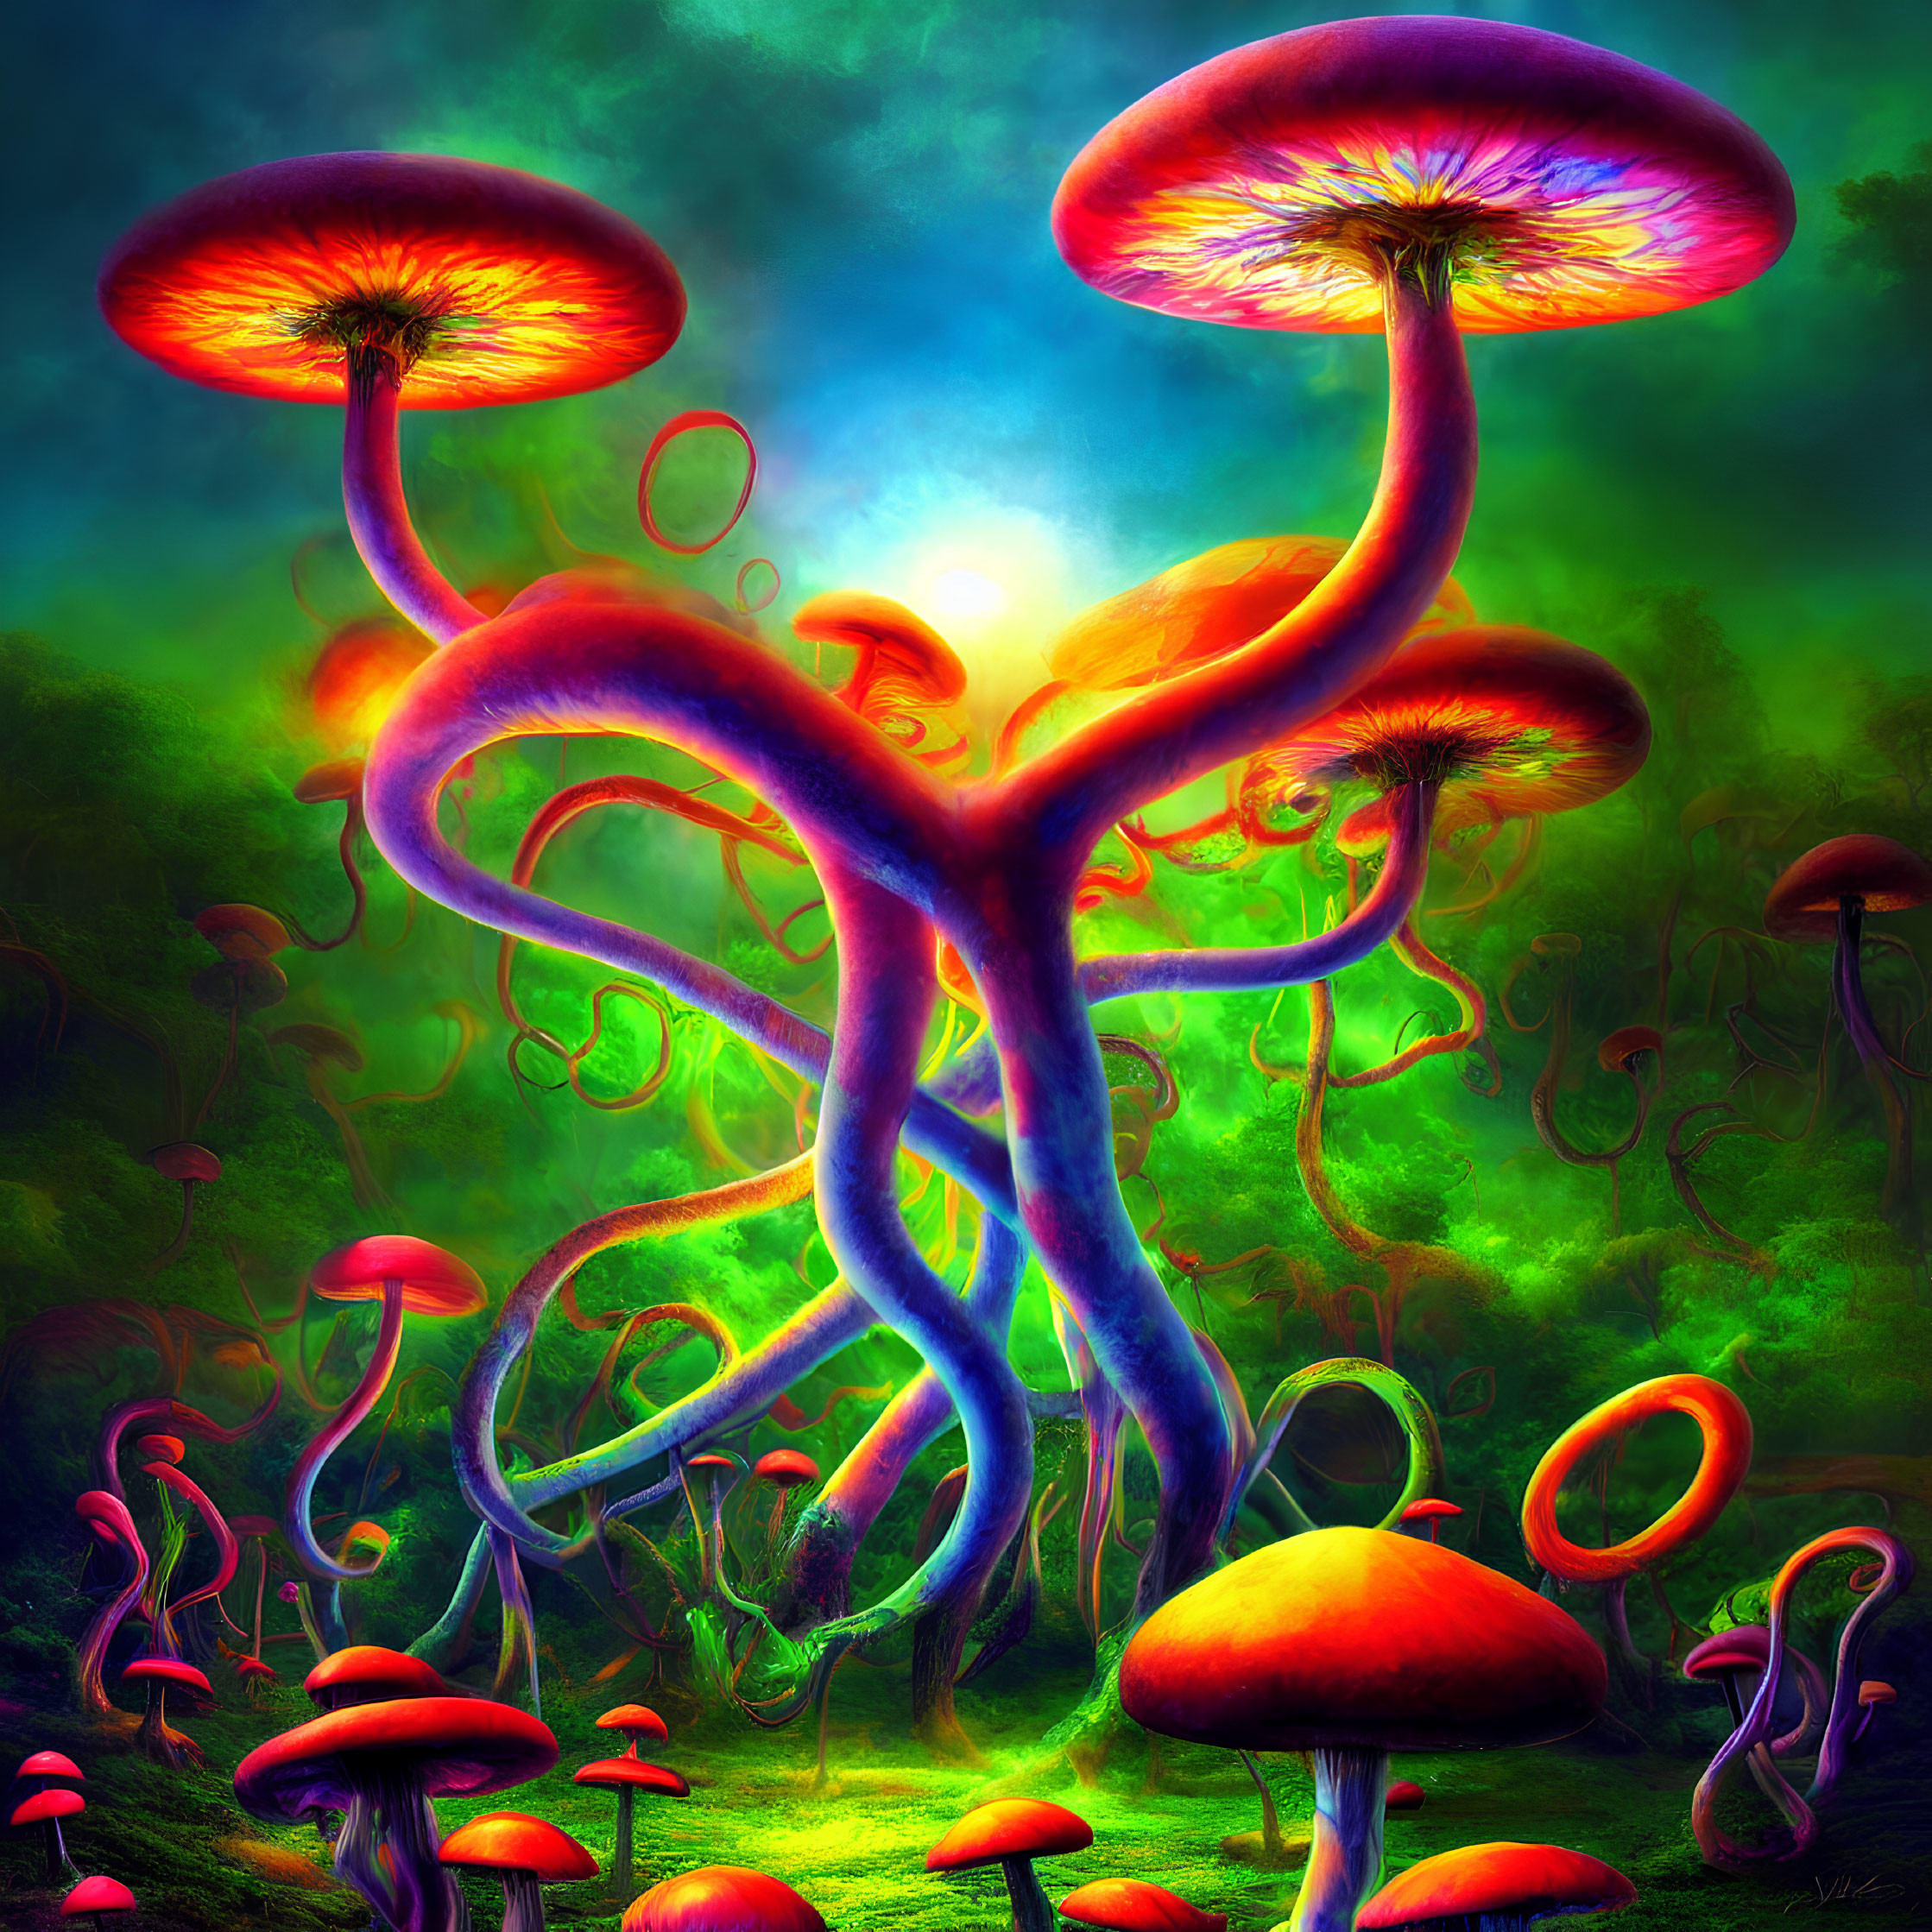 Colorful Mushrooms and Tendrils in Fantasy Landscape